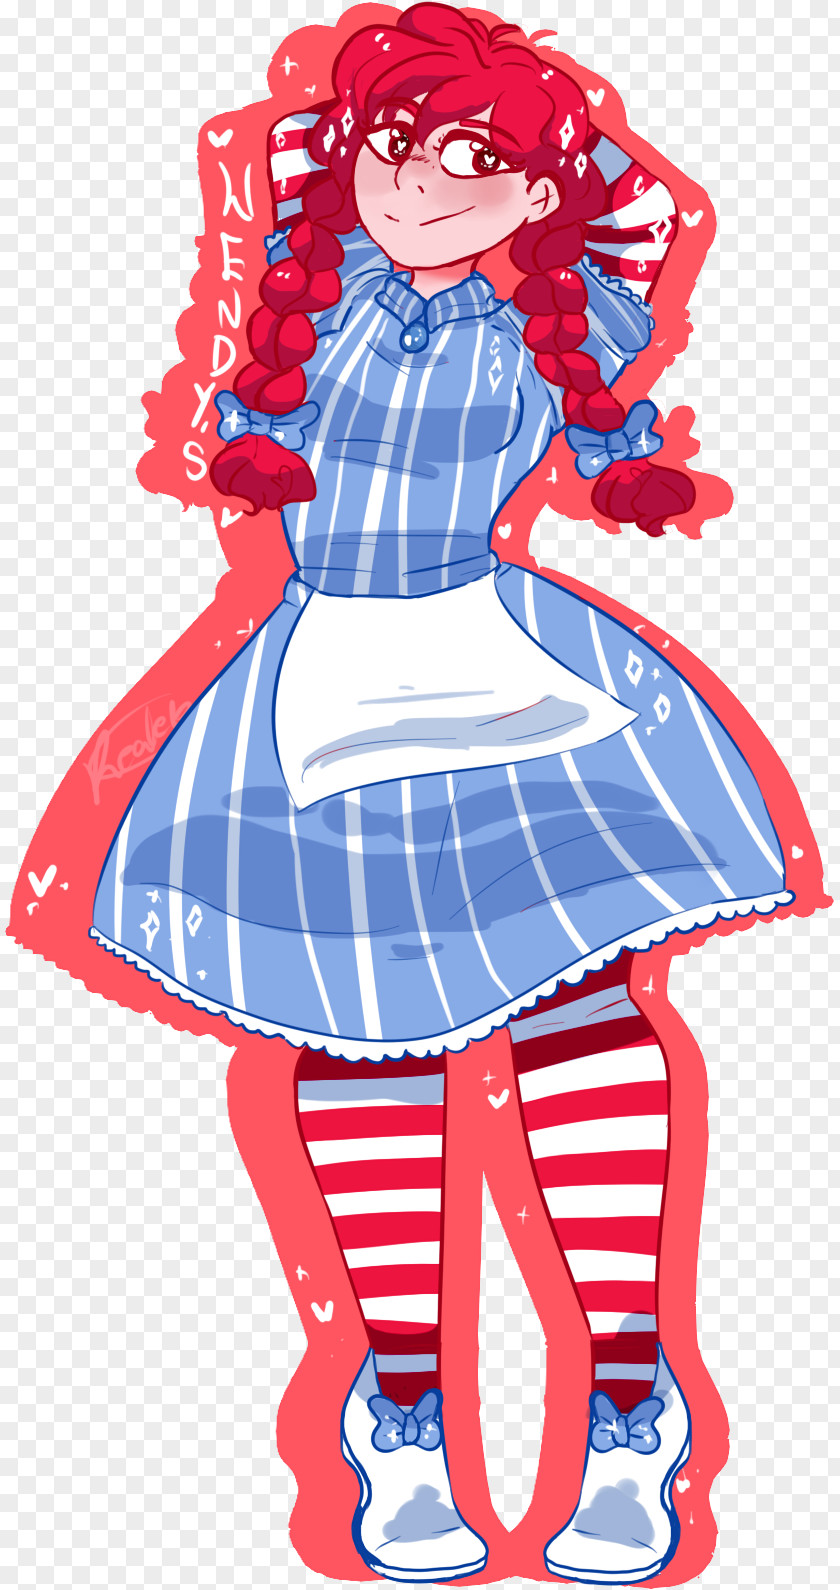 Hamburger Wendy's Company Anime PNG Anime, clipart PNG